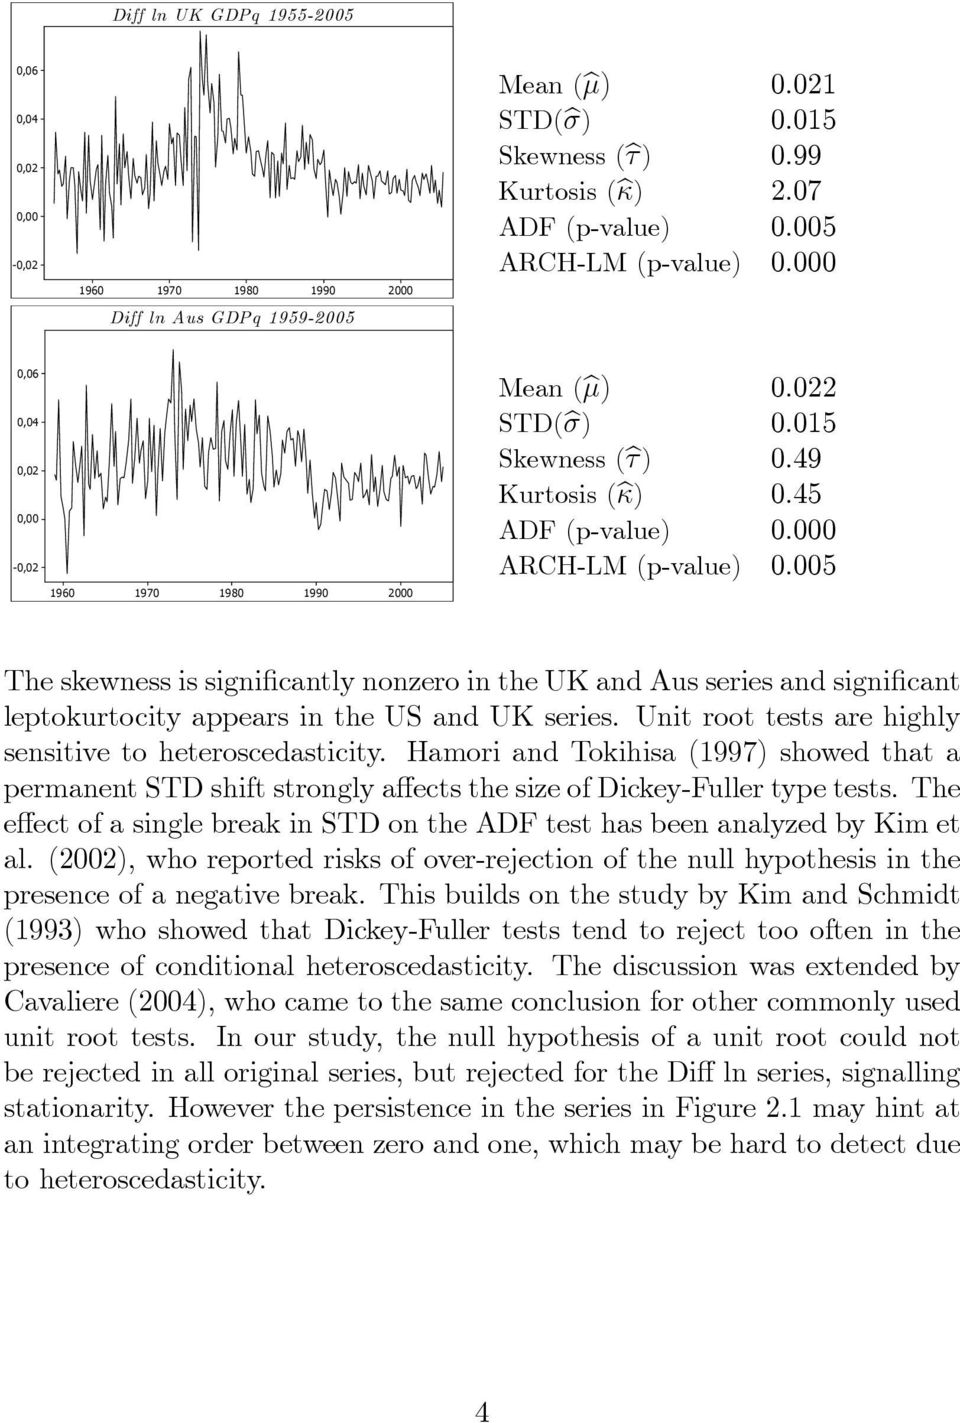 UK series. Unit root tests are highly sensitive to heteroscedasticity. Hamori and Tokihisa (1997) showed that a permanent STD shift strongly a ects the size of Dickey-Fuller type tests.